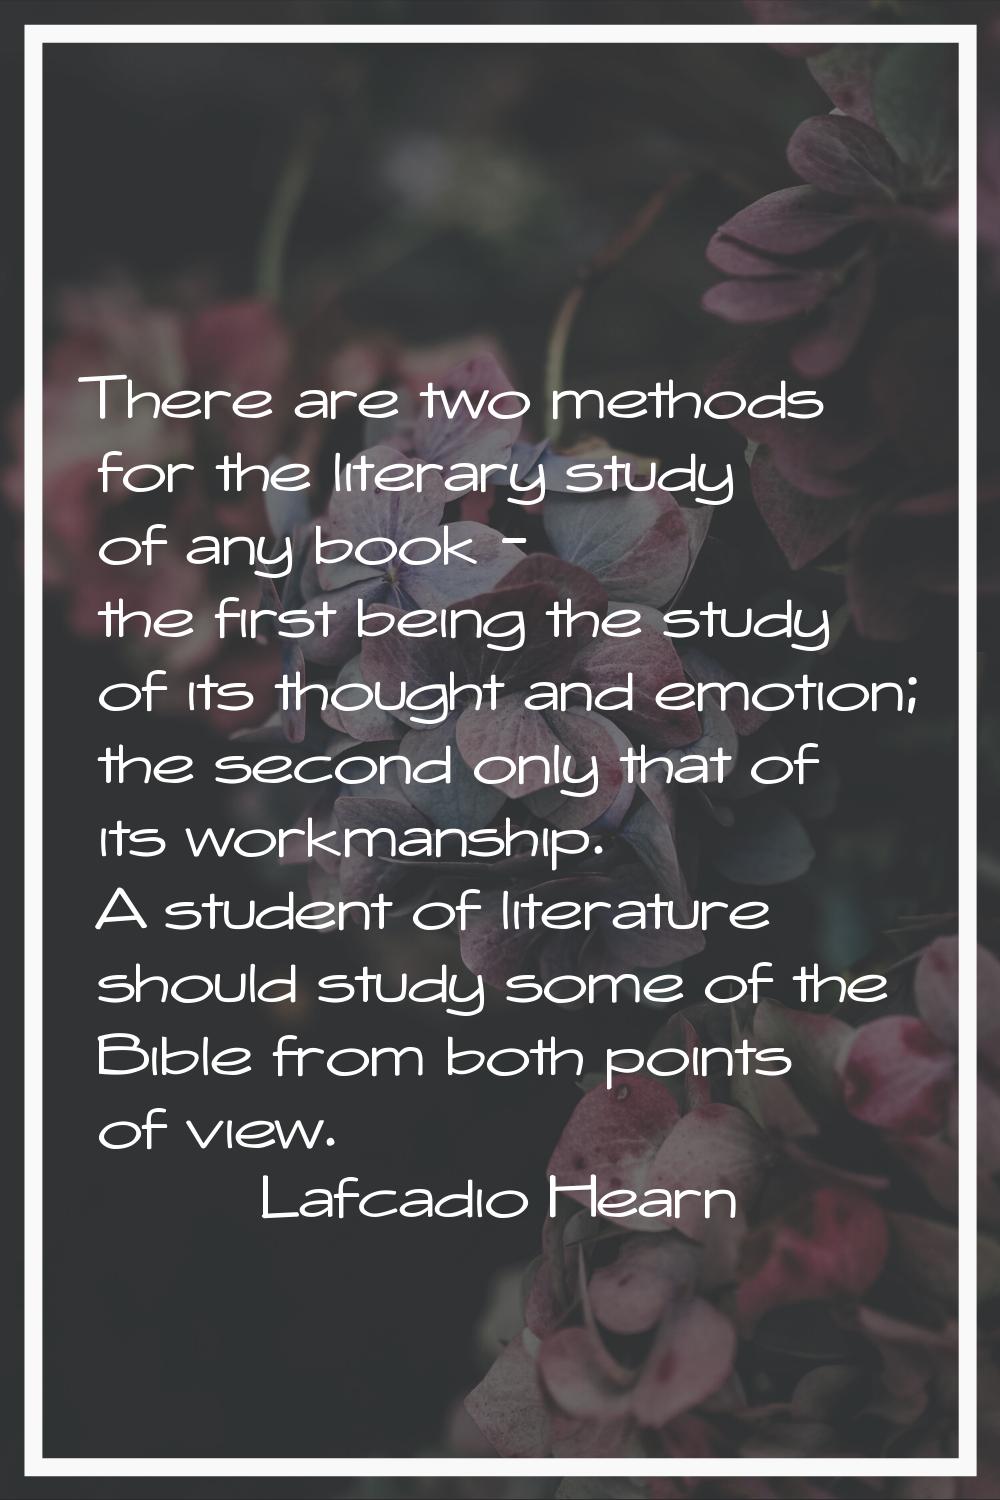 There are two methods for the literary study of any book - the first being the study of its thought